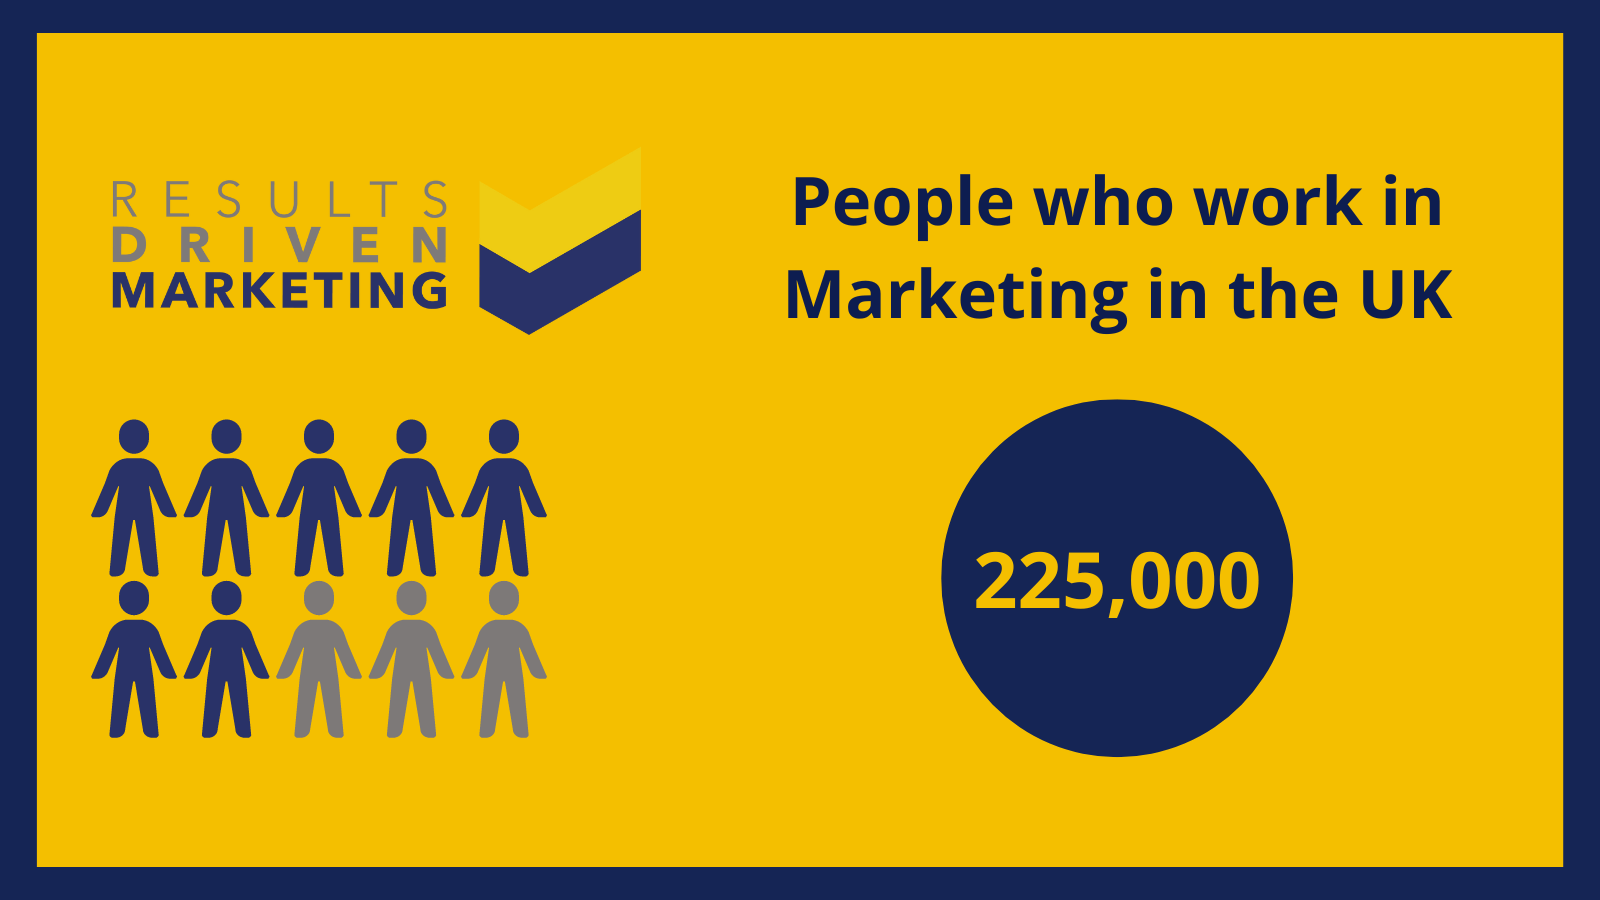 How Many People in the UK Work in Marketing?